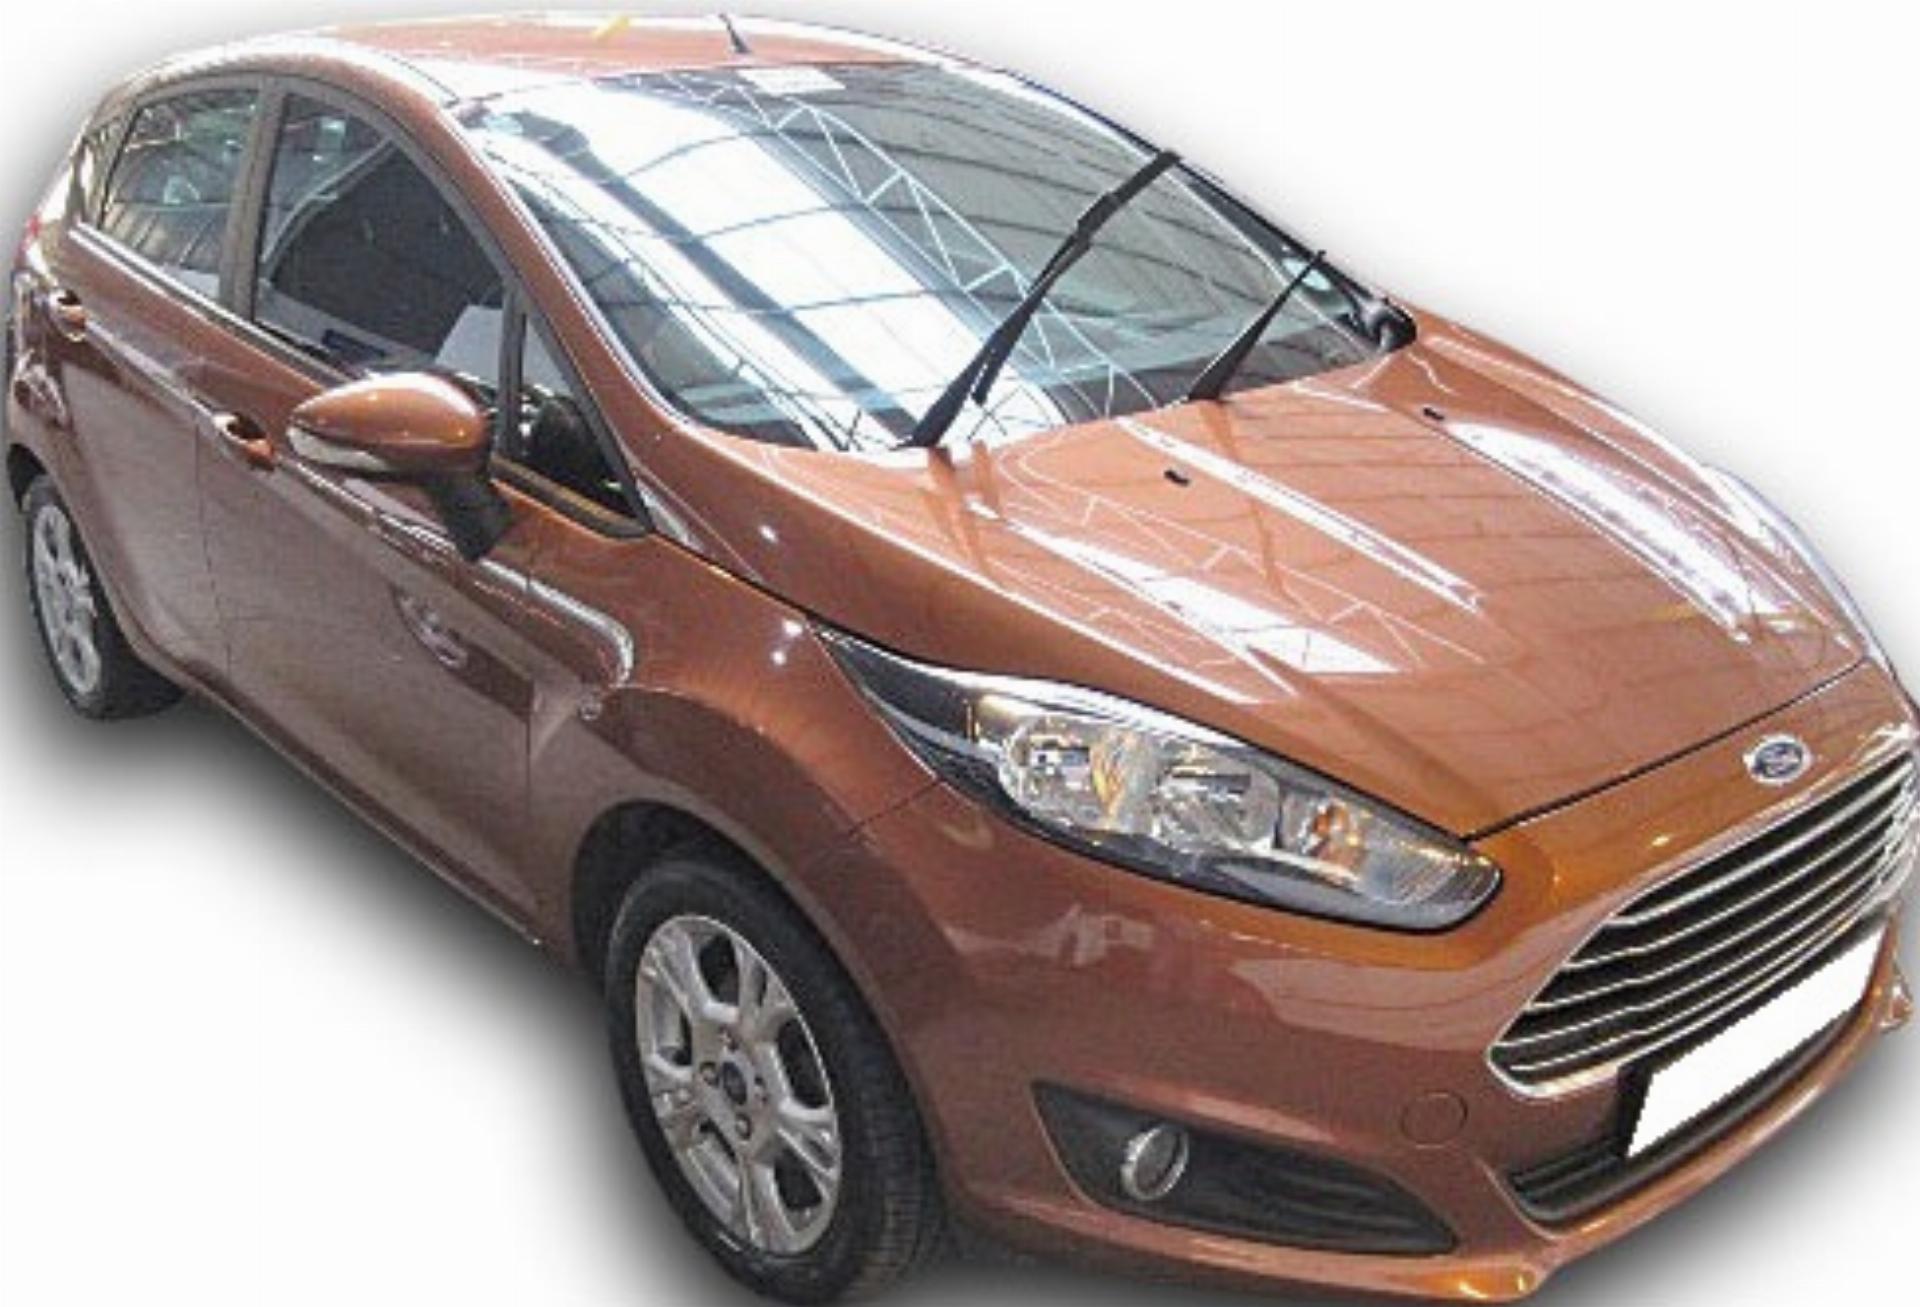 Ford Fiesta 1.0 Ecoboost Trend 5DR